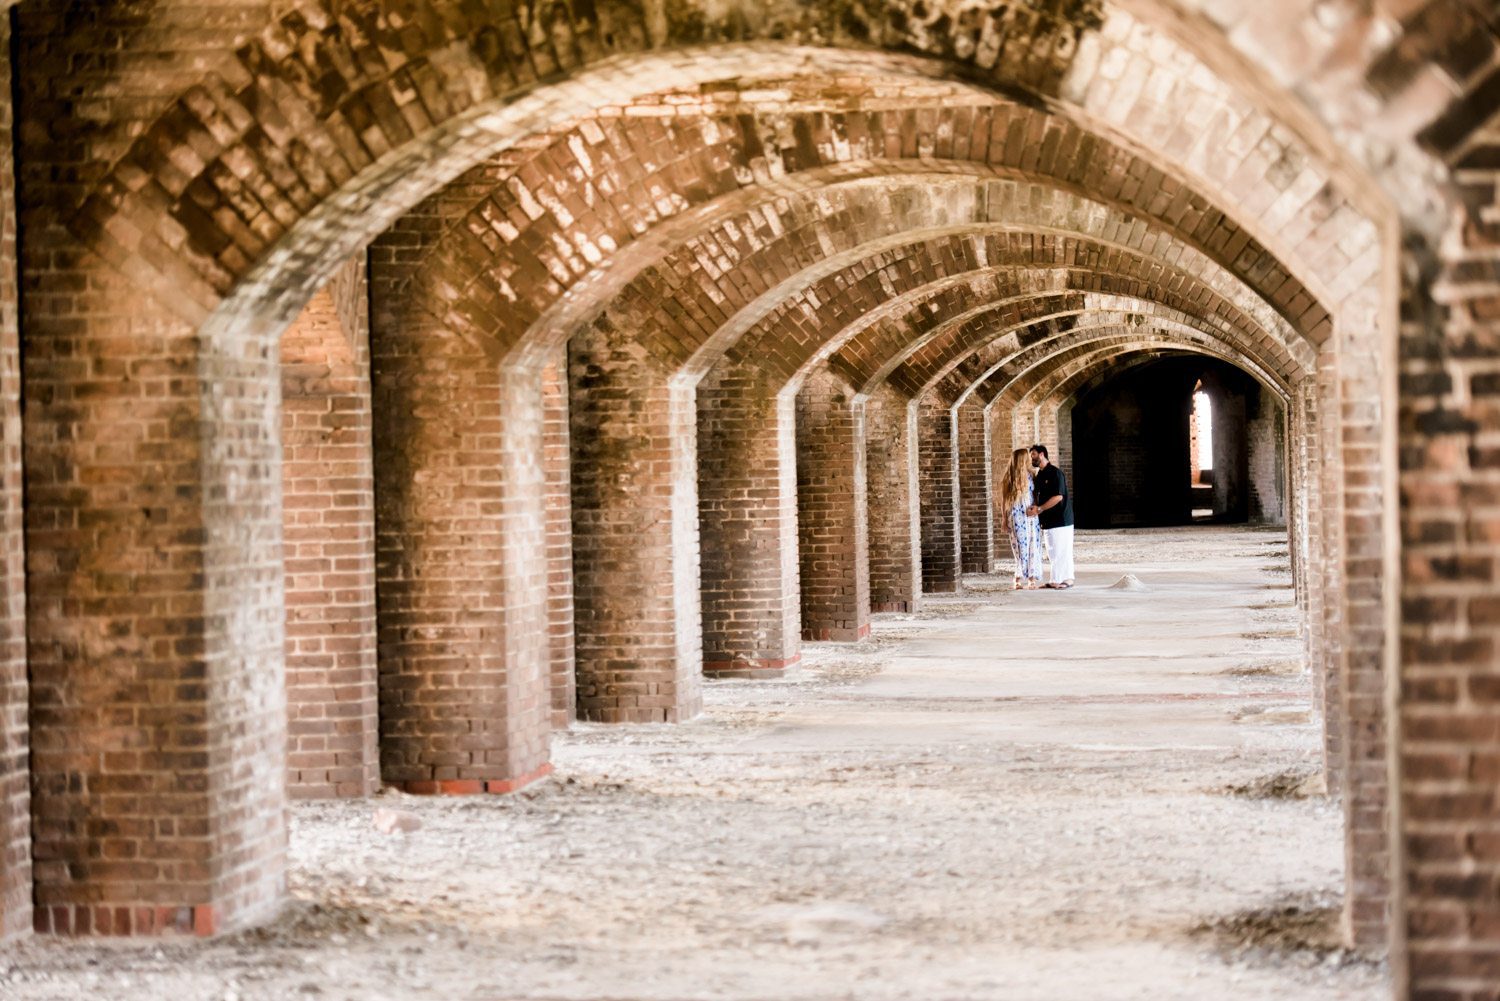 A couple in a destination engagement session, walking down an archway in the old fort of Dry Tortugas.